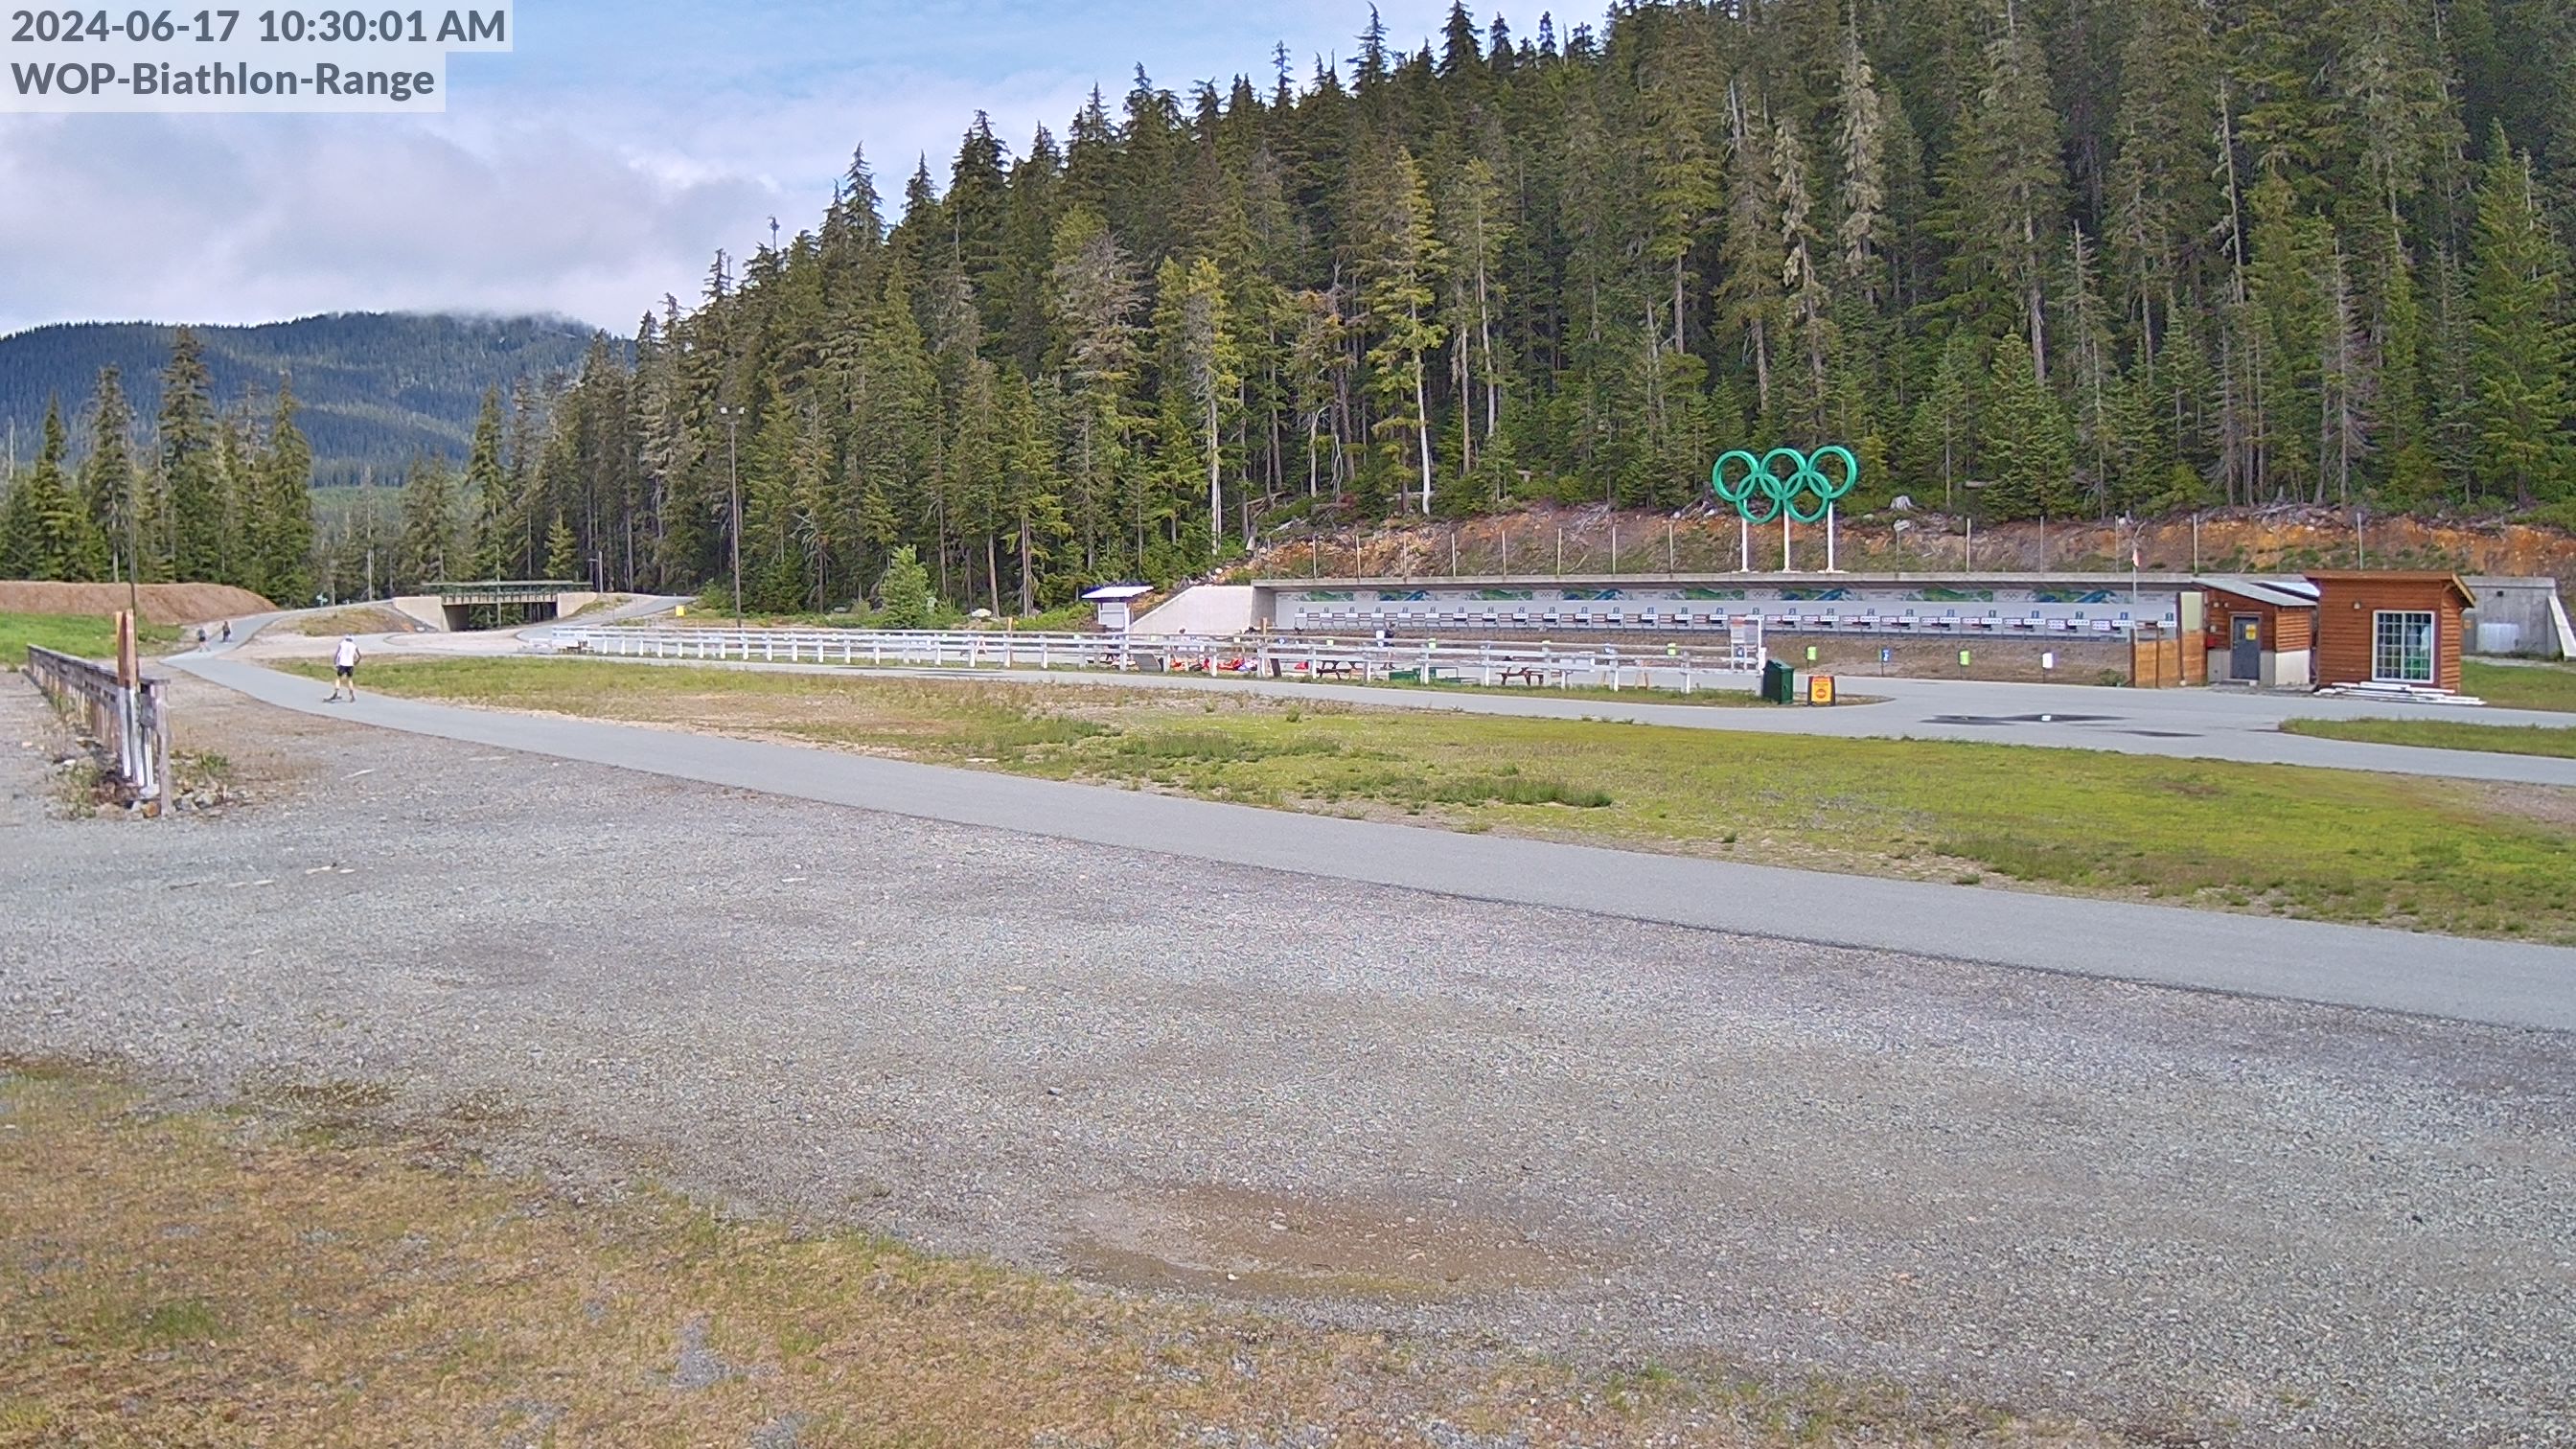 View looking North East to the Olympic Biathlon Range